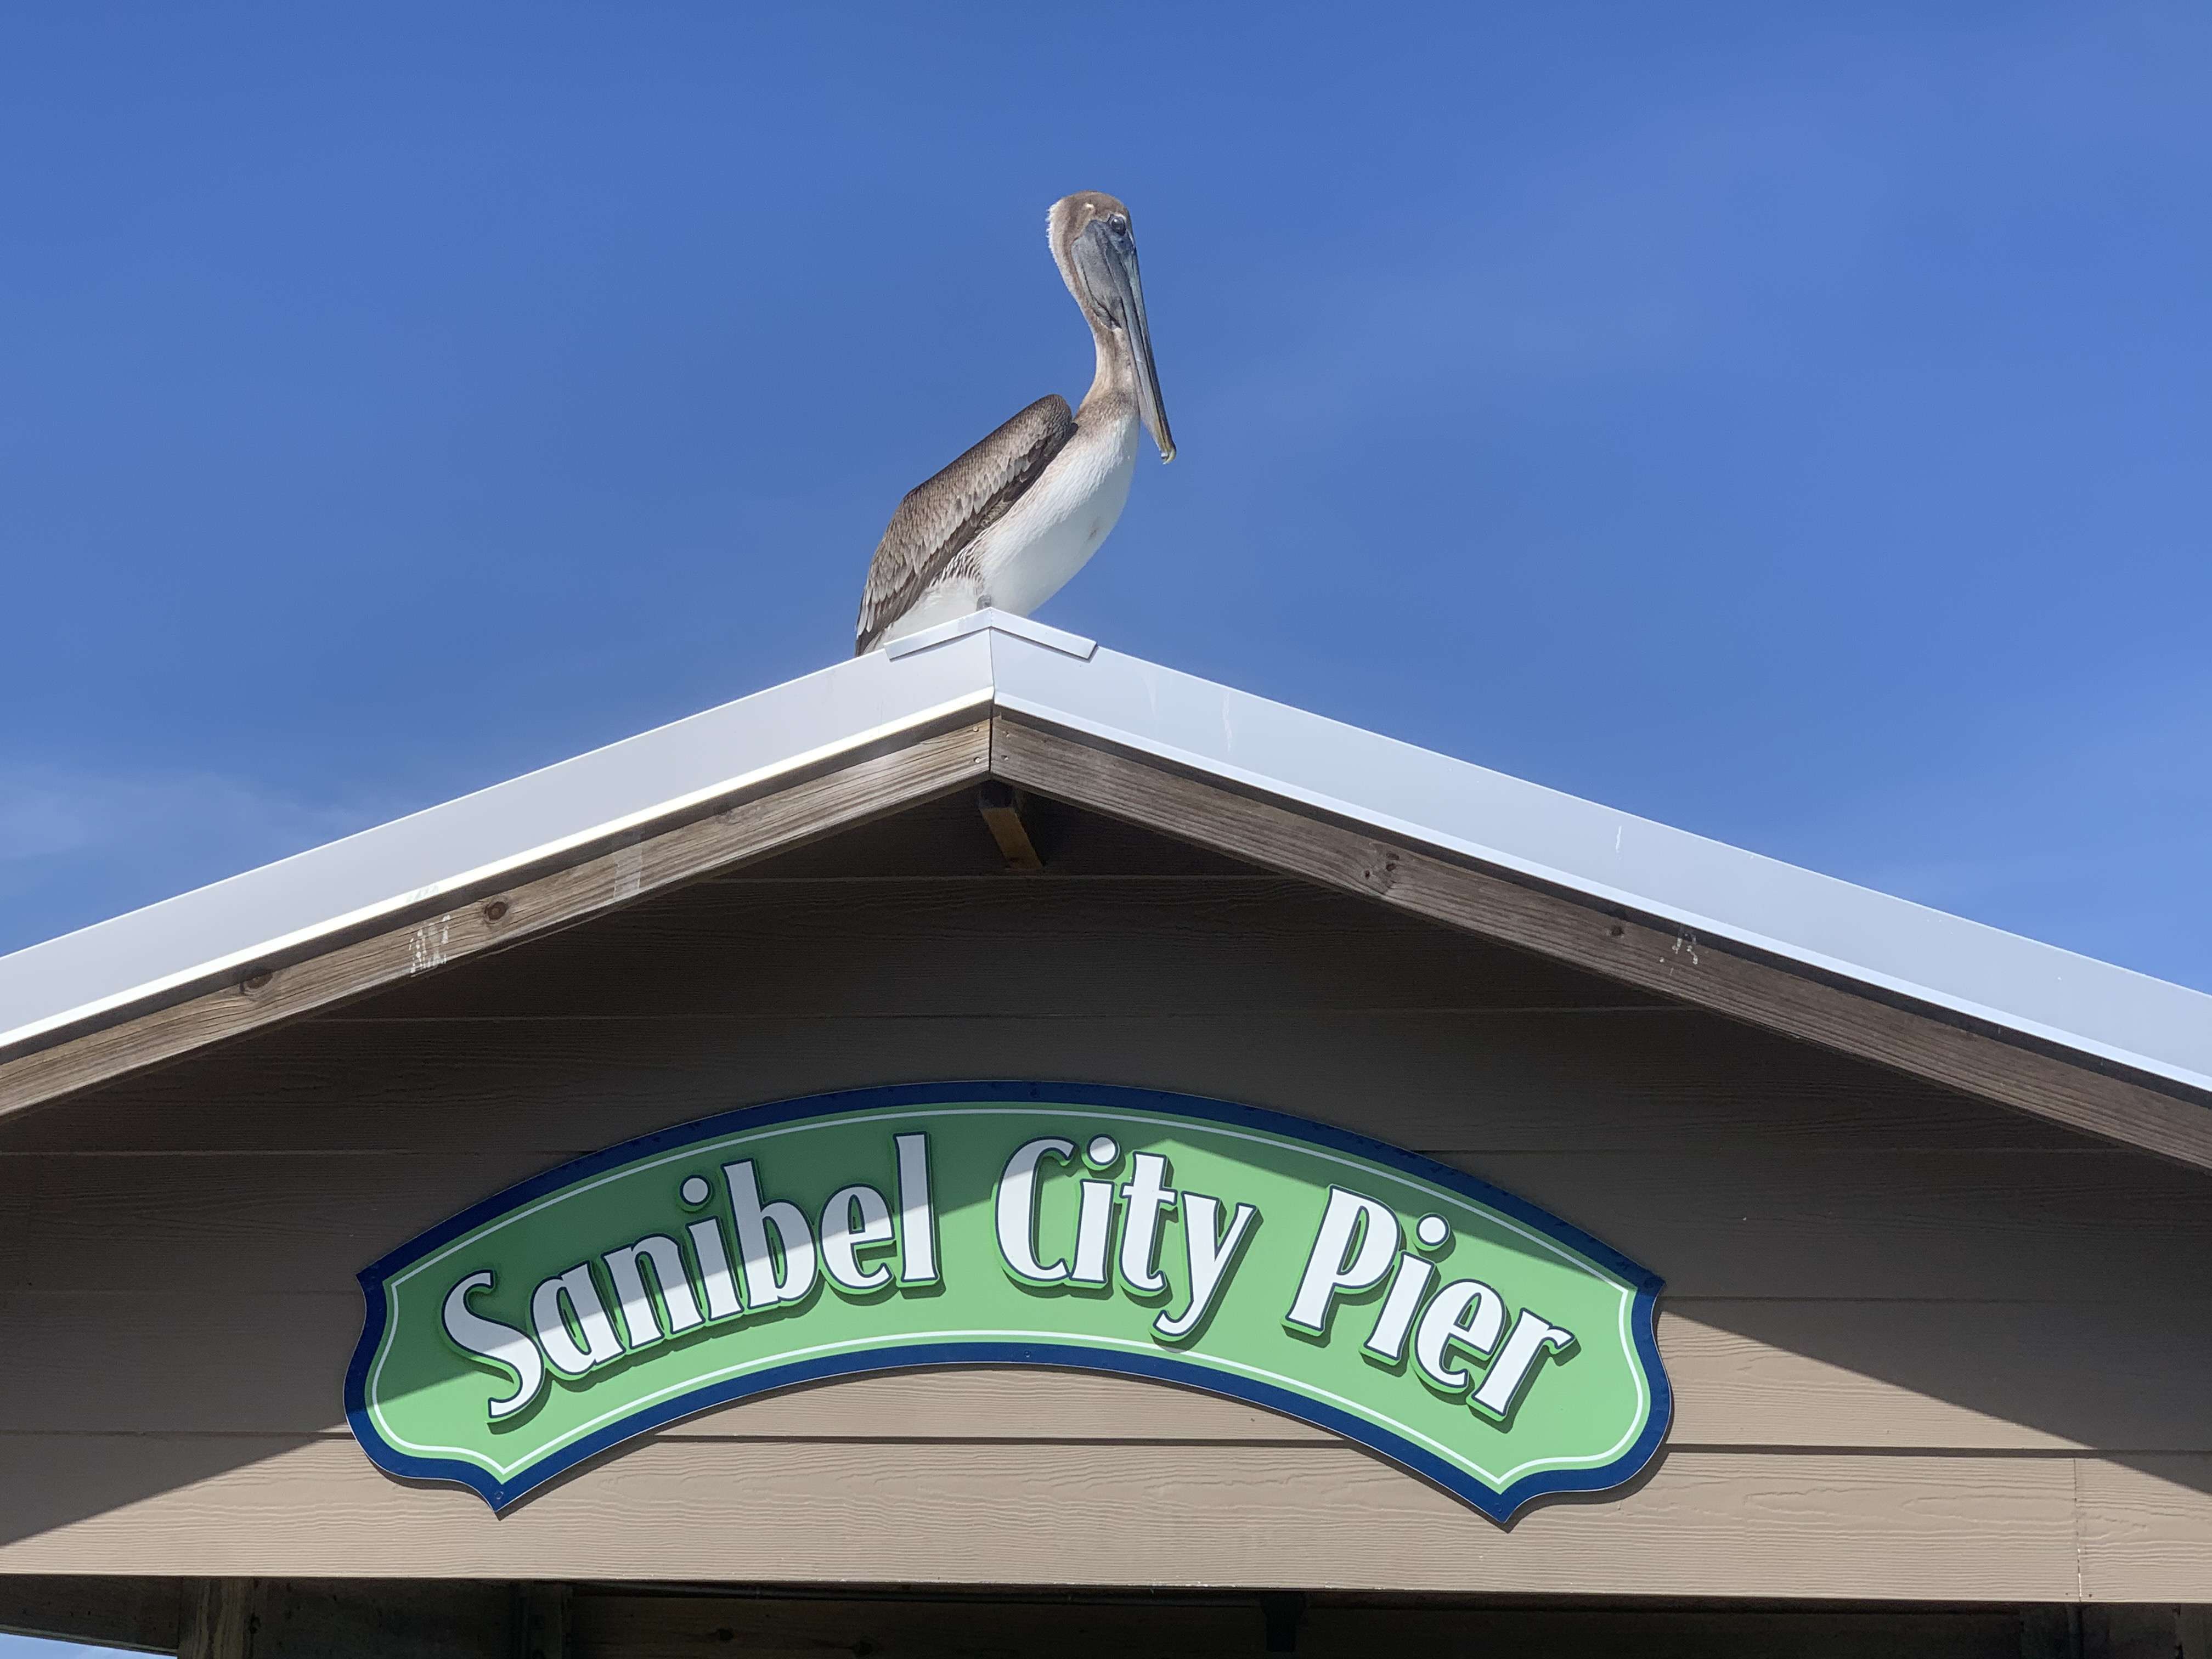 Pelican on the roof